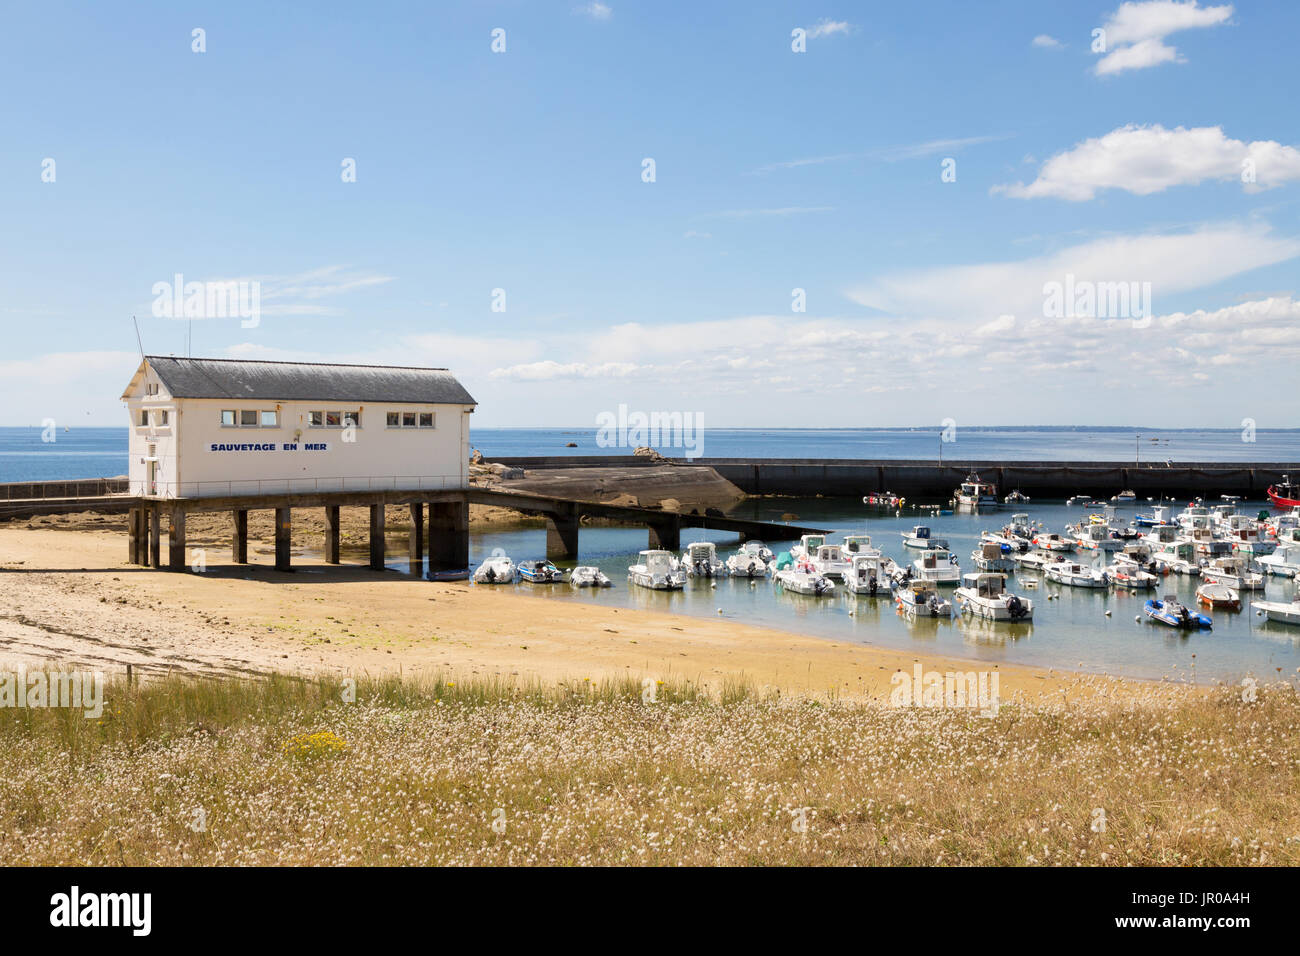 The sea rescue station ( Sauvetage en Mer ), and harbour, Trevignon, Finistere, Brittany France Stock Photo